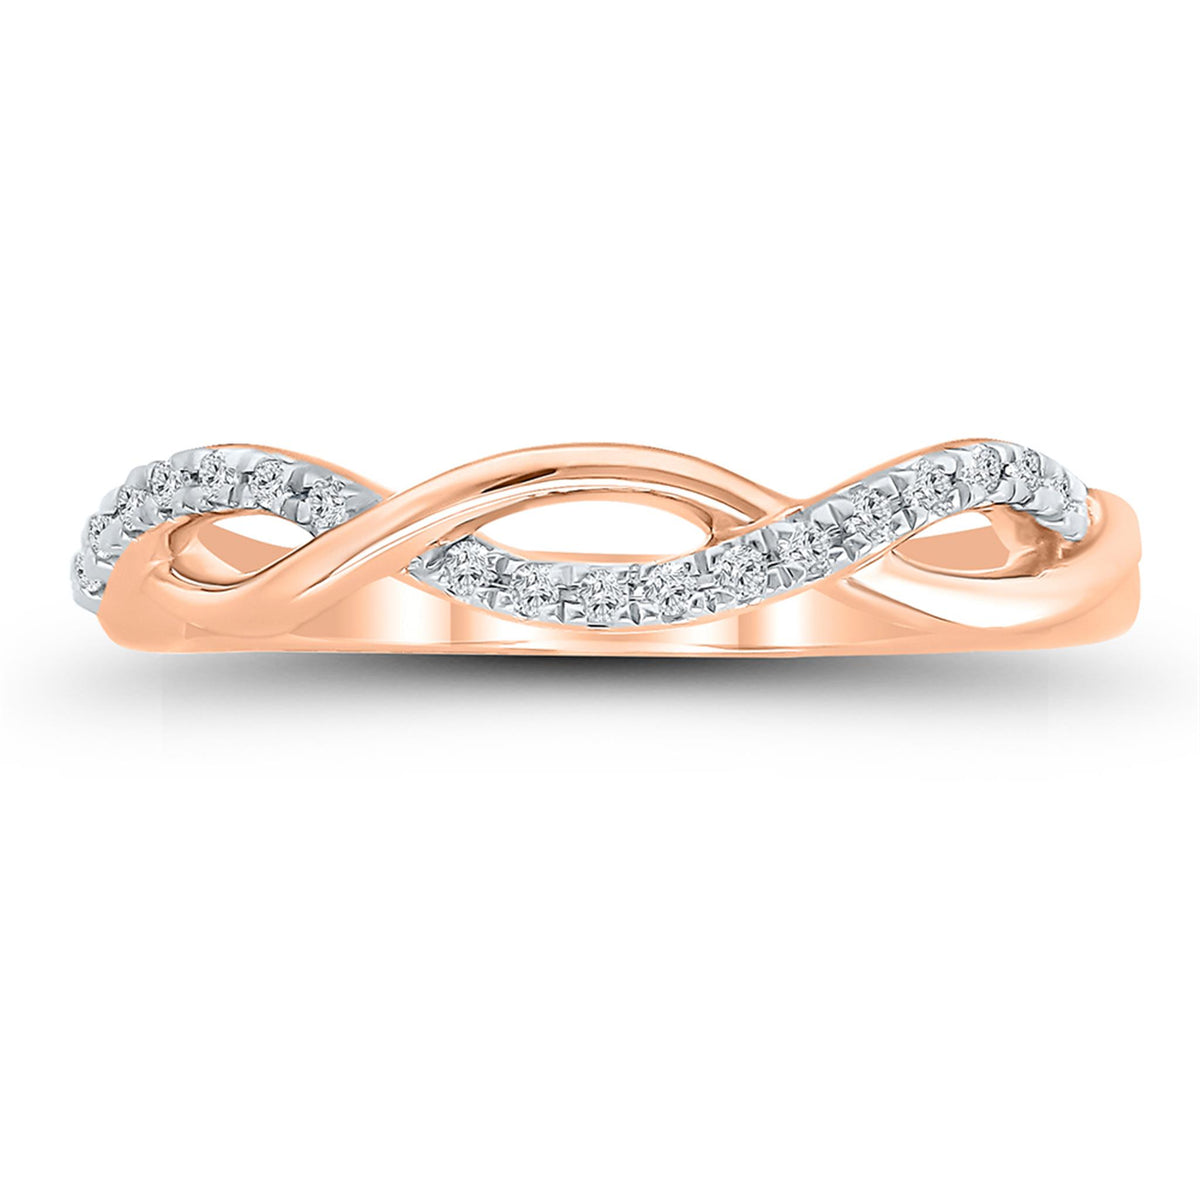 10Kt Rose Gold Infinity Twist Ring With 0.10cttw Natural Diamonds